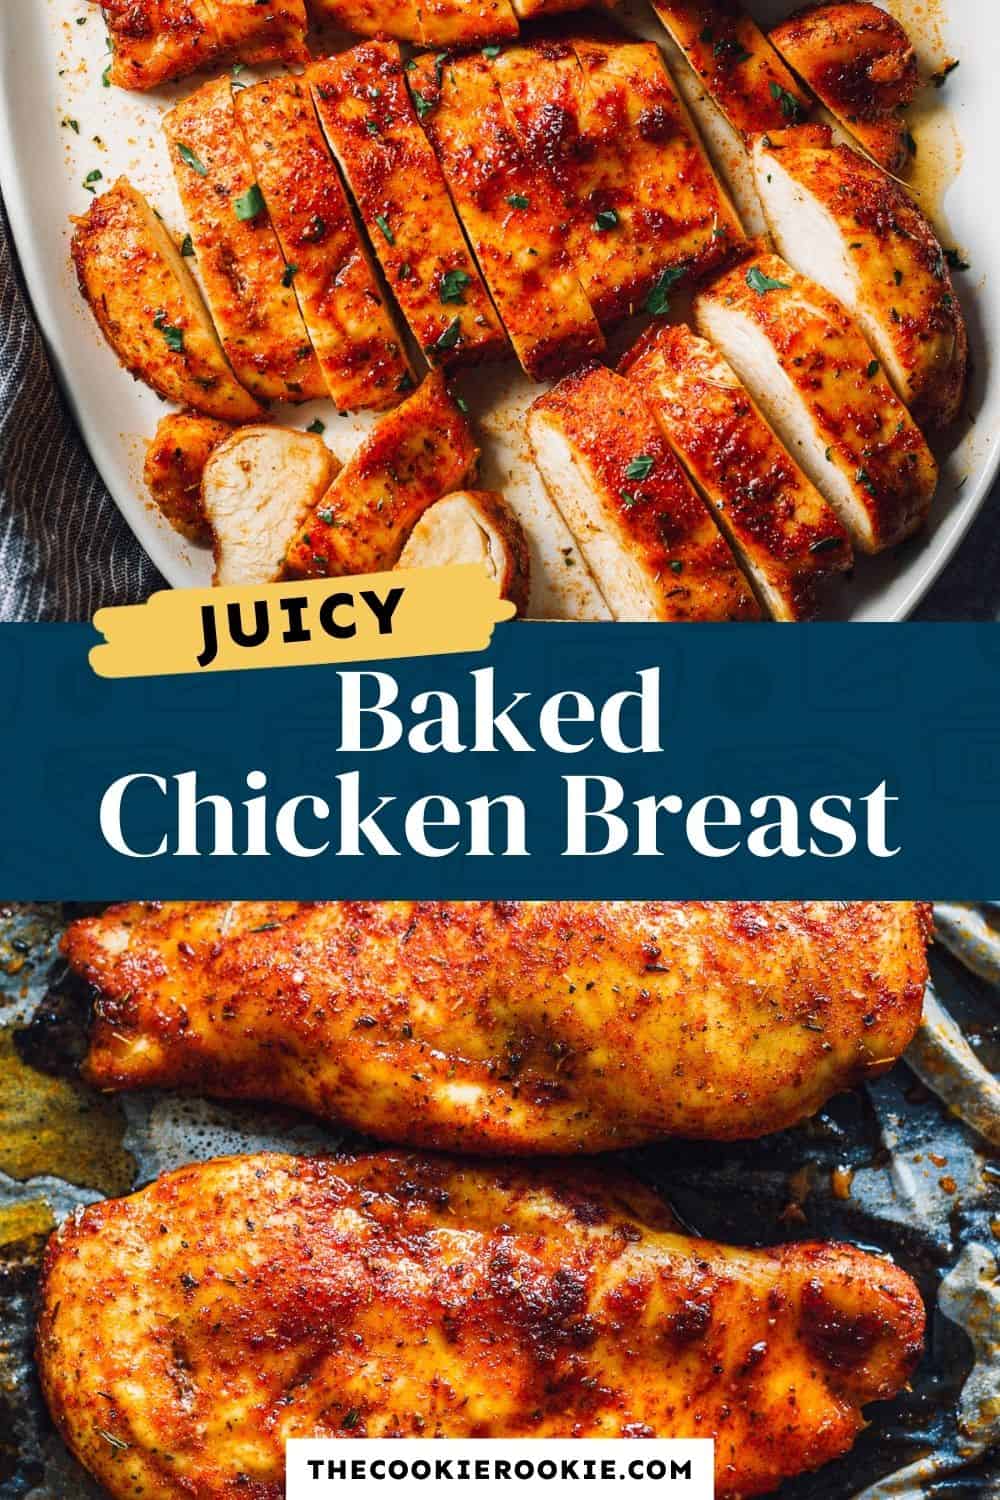 Seasoned Chicken Breast Recipe Oven Baked The Cookie Rookie®